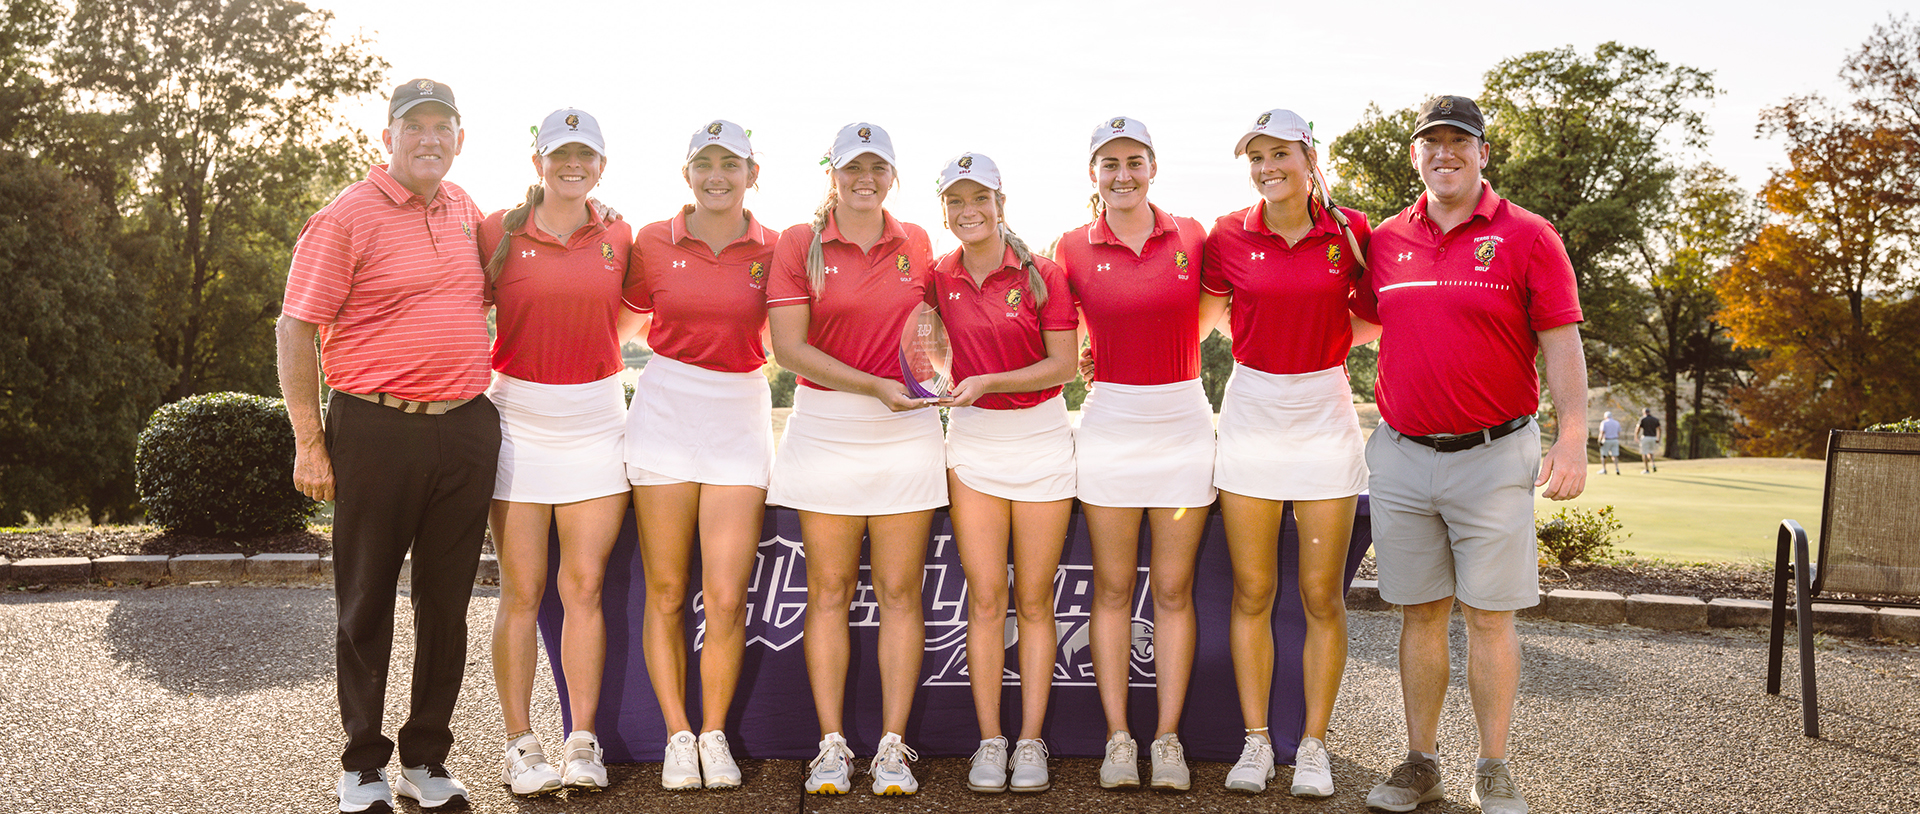 Ferris State women’s golf team selected to compete in NCAA DII East Regional Championship